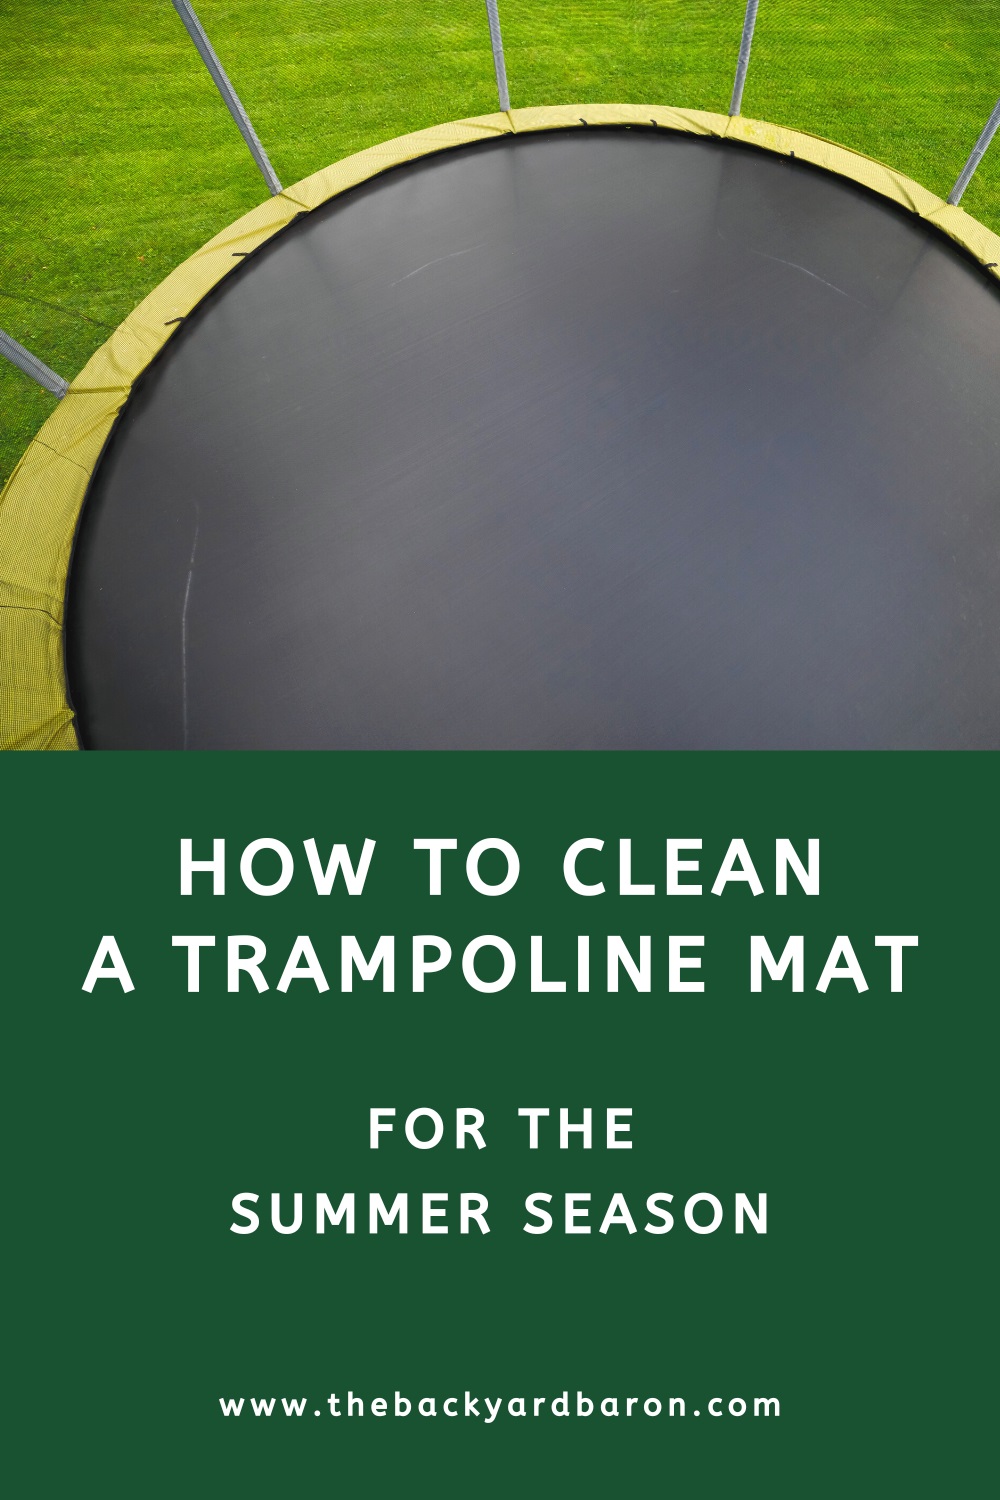 How to clean a trampoline (step by step guide)